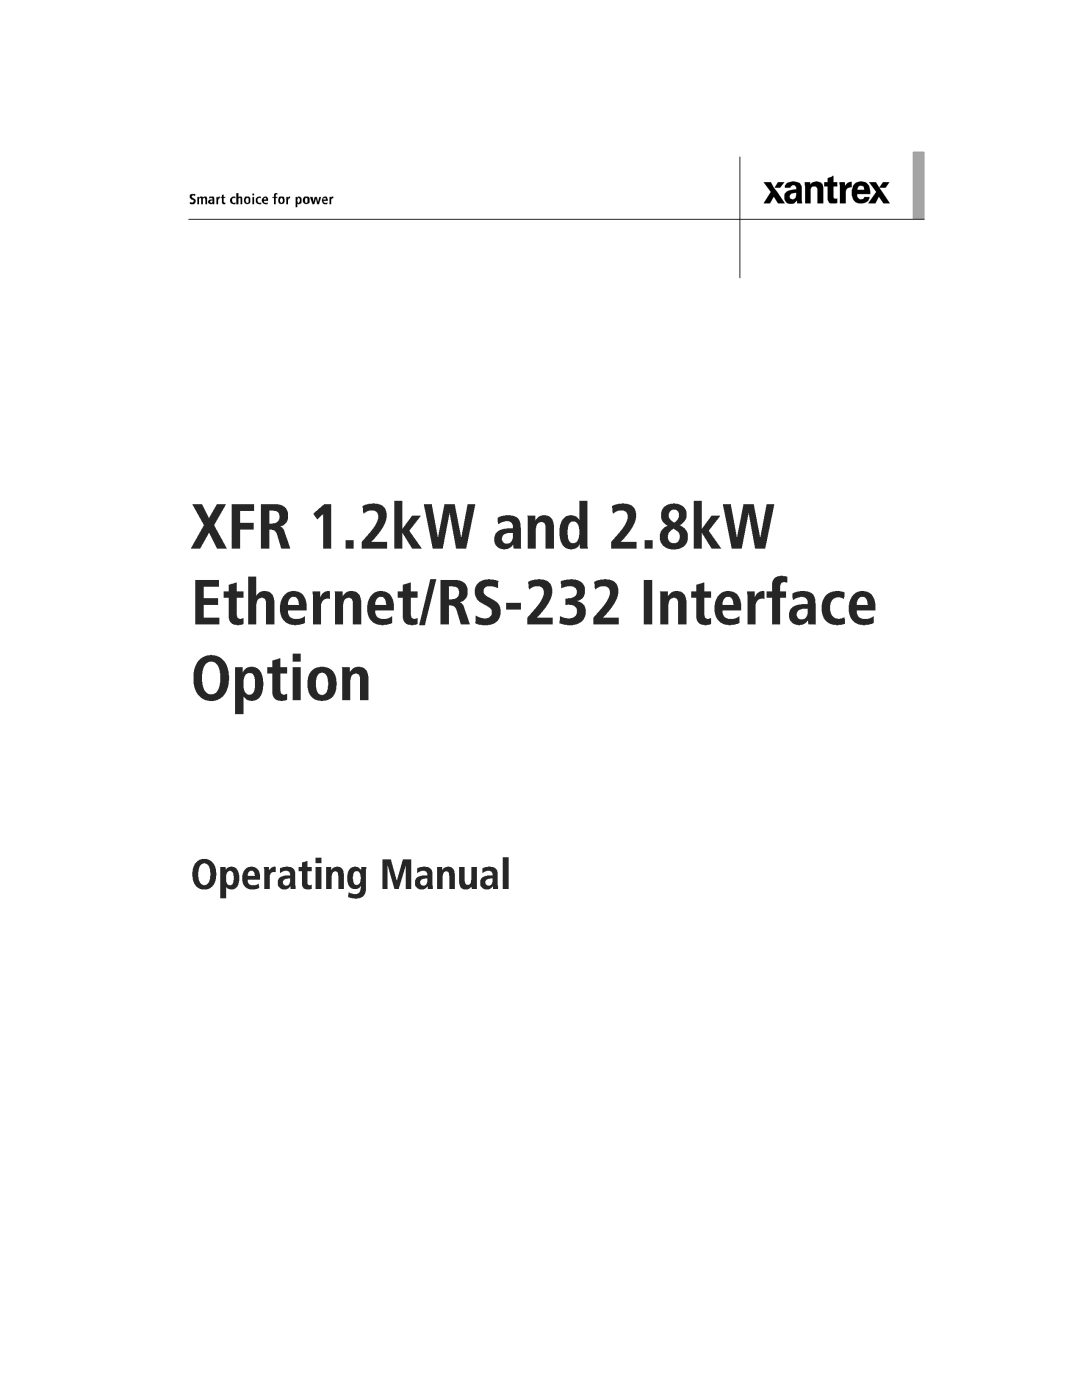 Xantrex Technology ENET-XFR3 manual XFR 1.2kW and 2.8kW Ethernet/RS-232 Interface Option, Operating Manual 